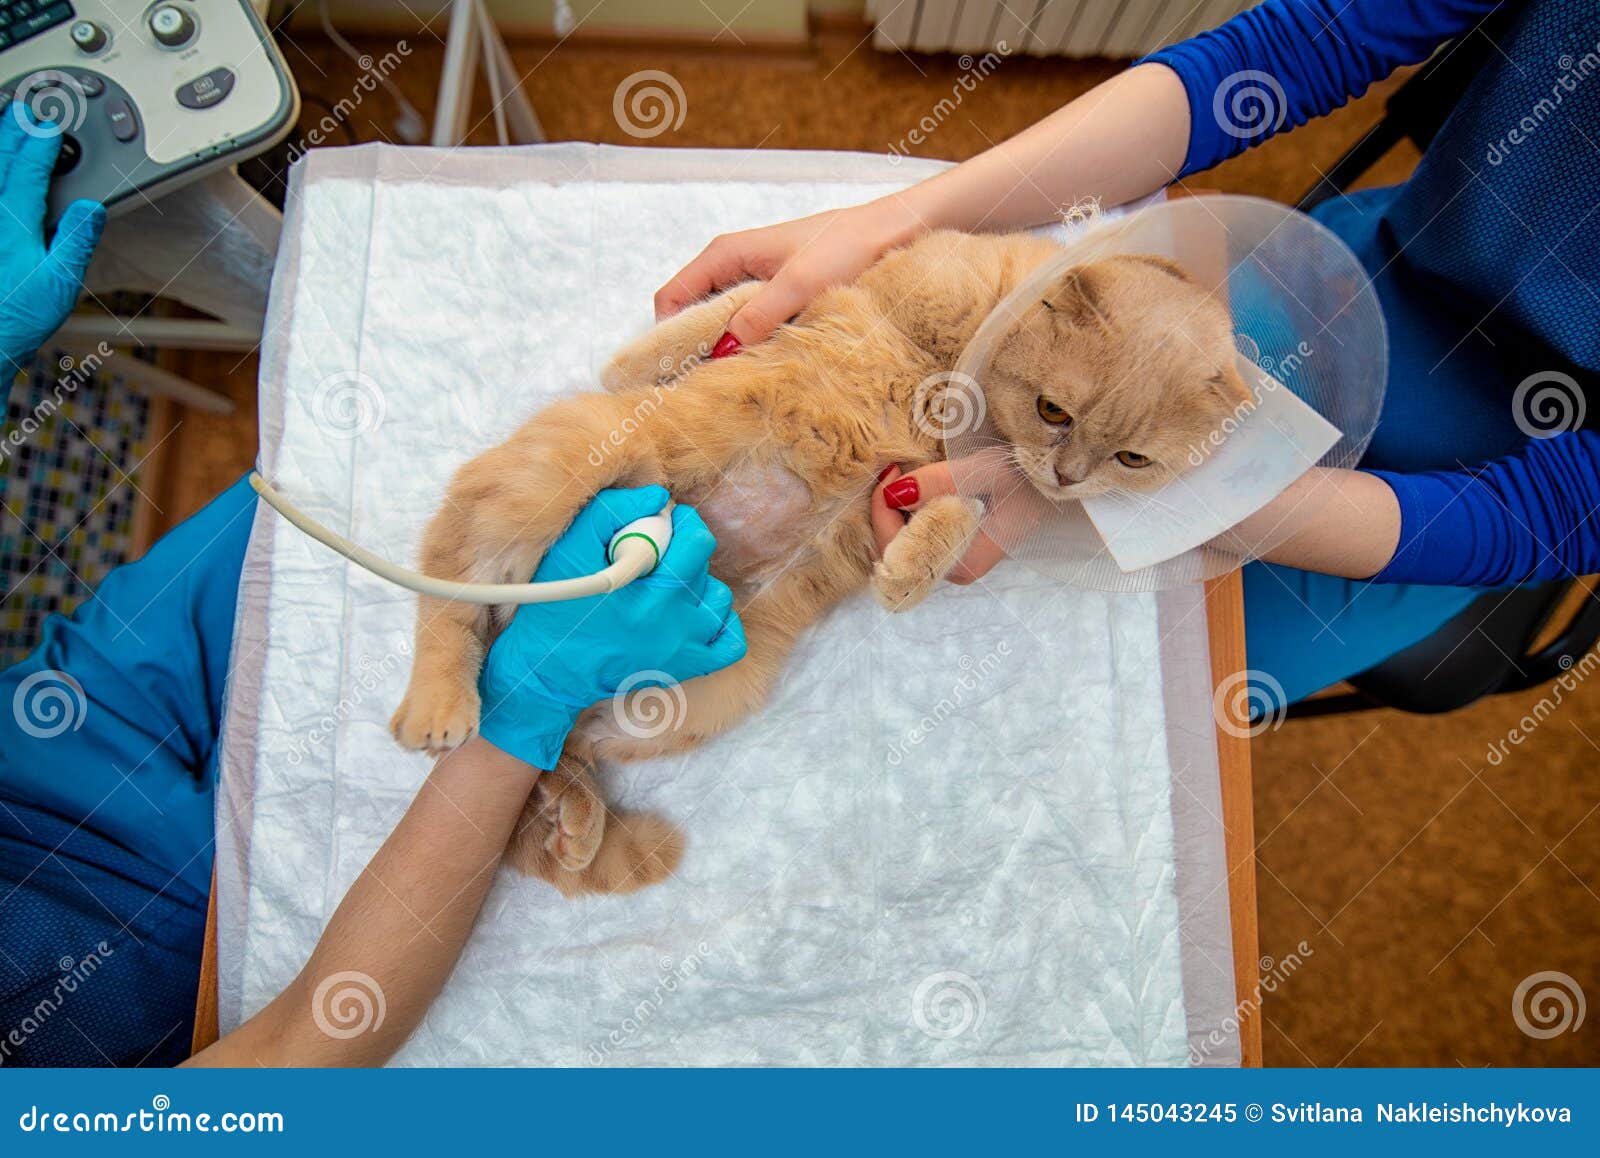 the doctor does an ultrasound examination of the cat`s abdomen, an animal on the operating table, a doctor and a patient